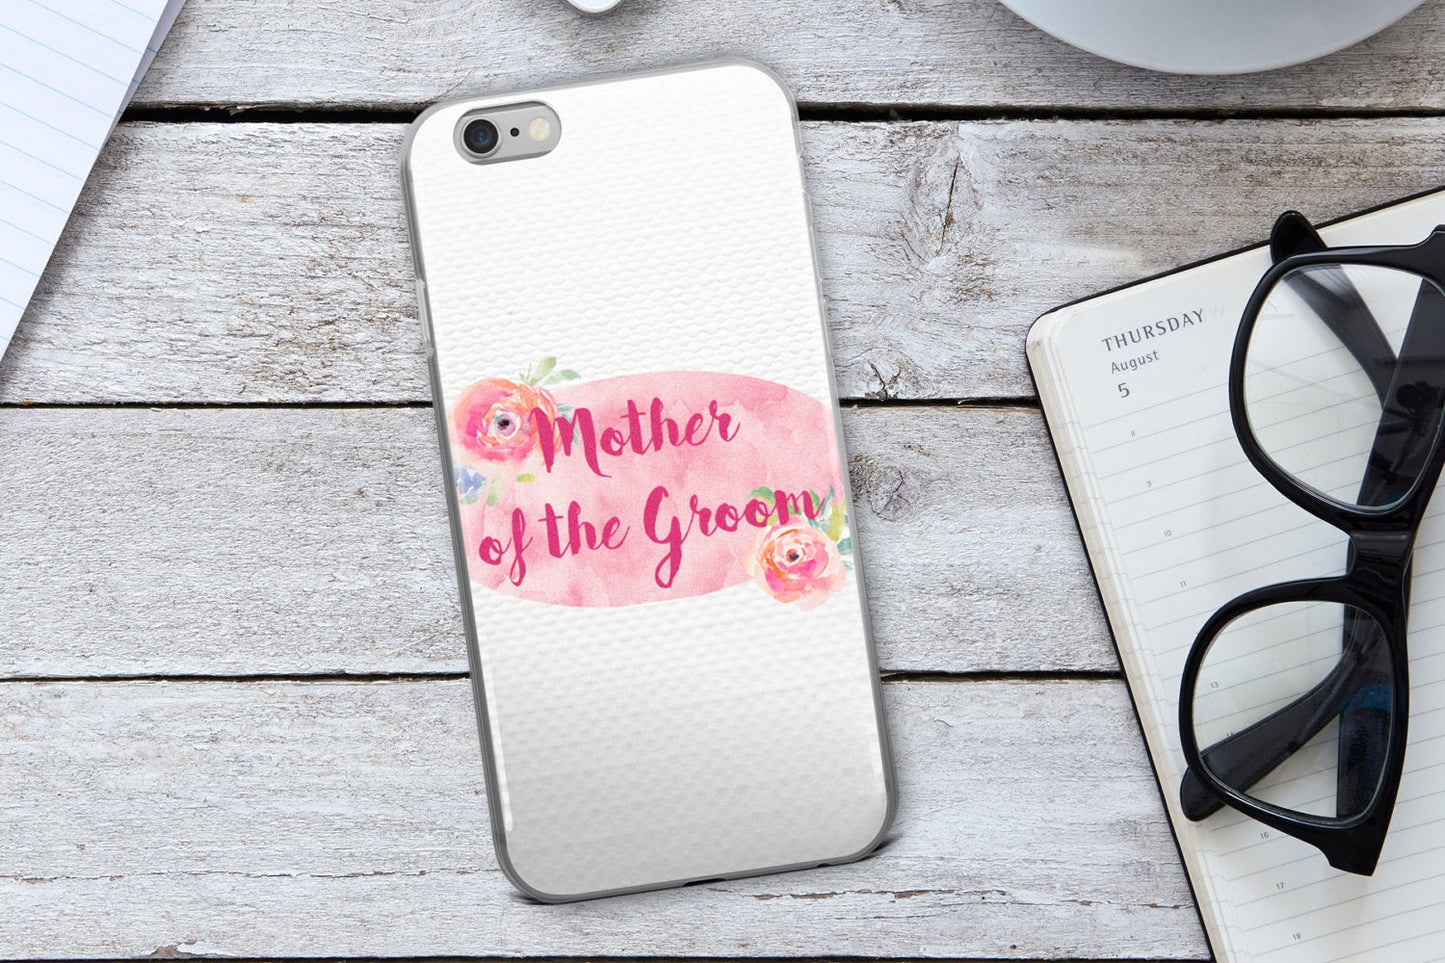 Mother Of The Groom Phone Case